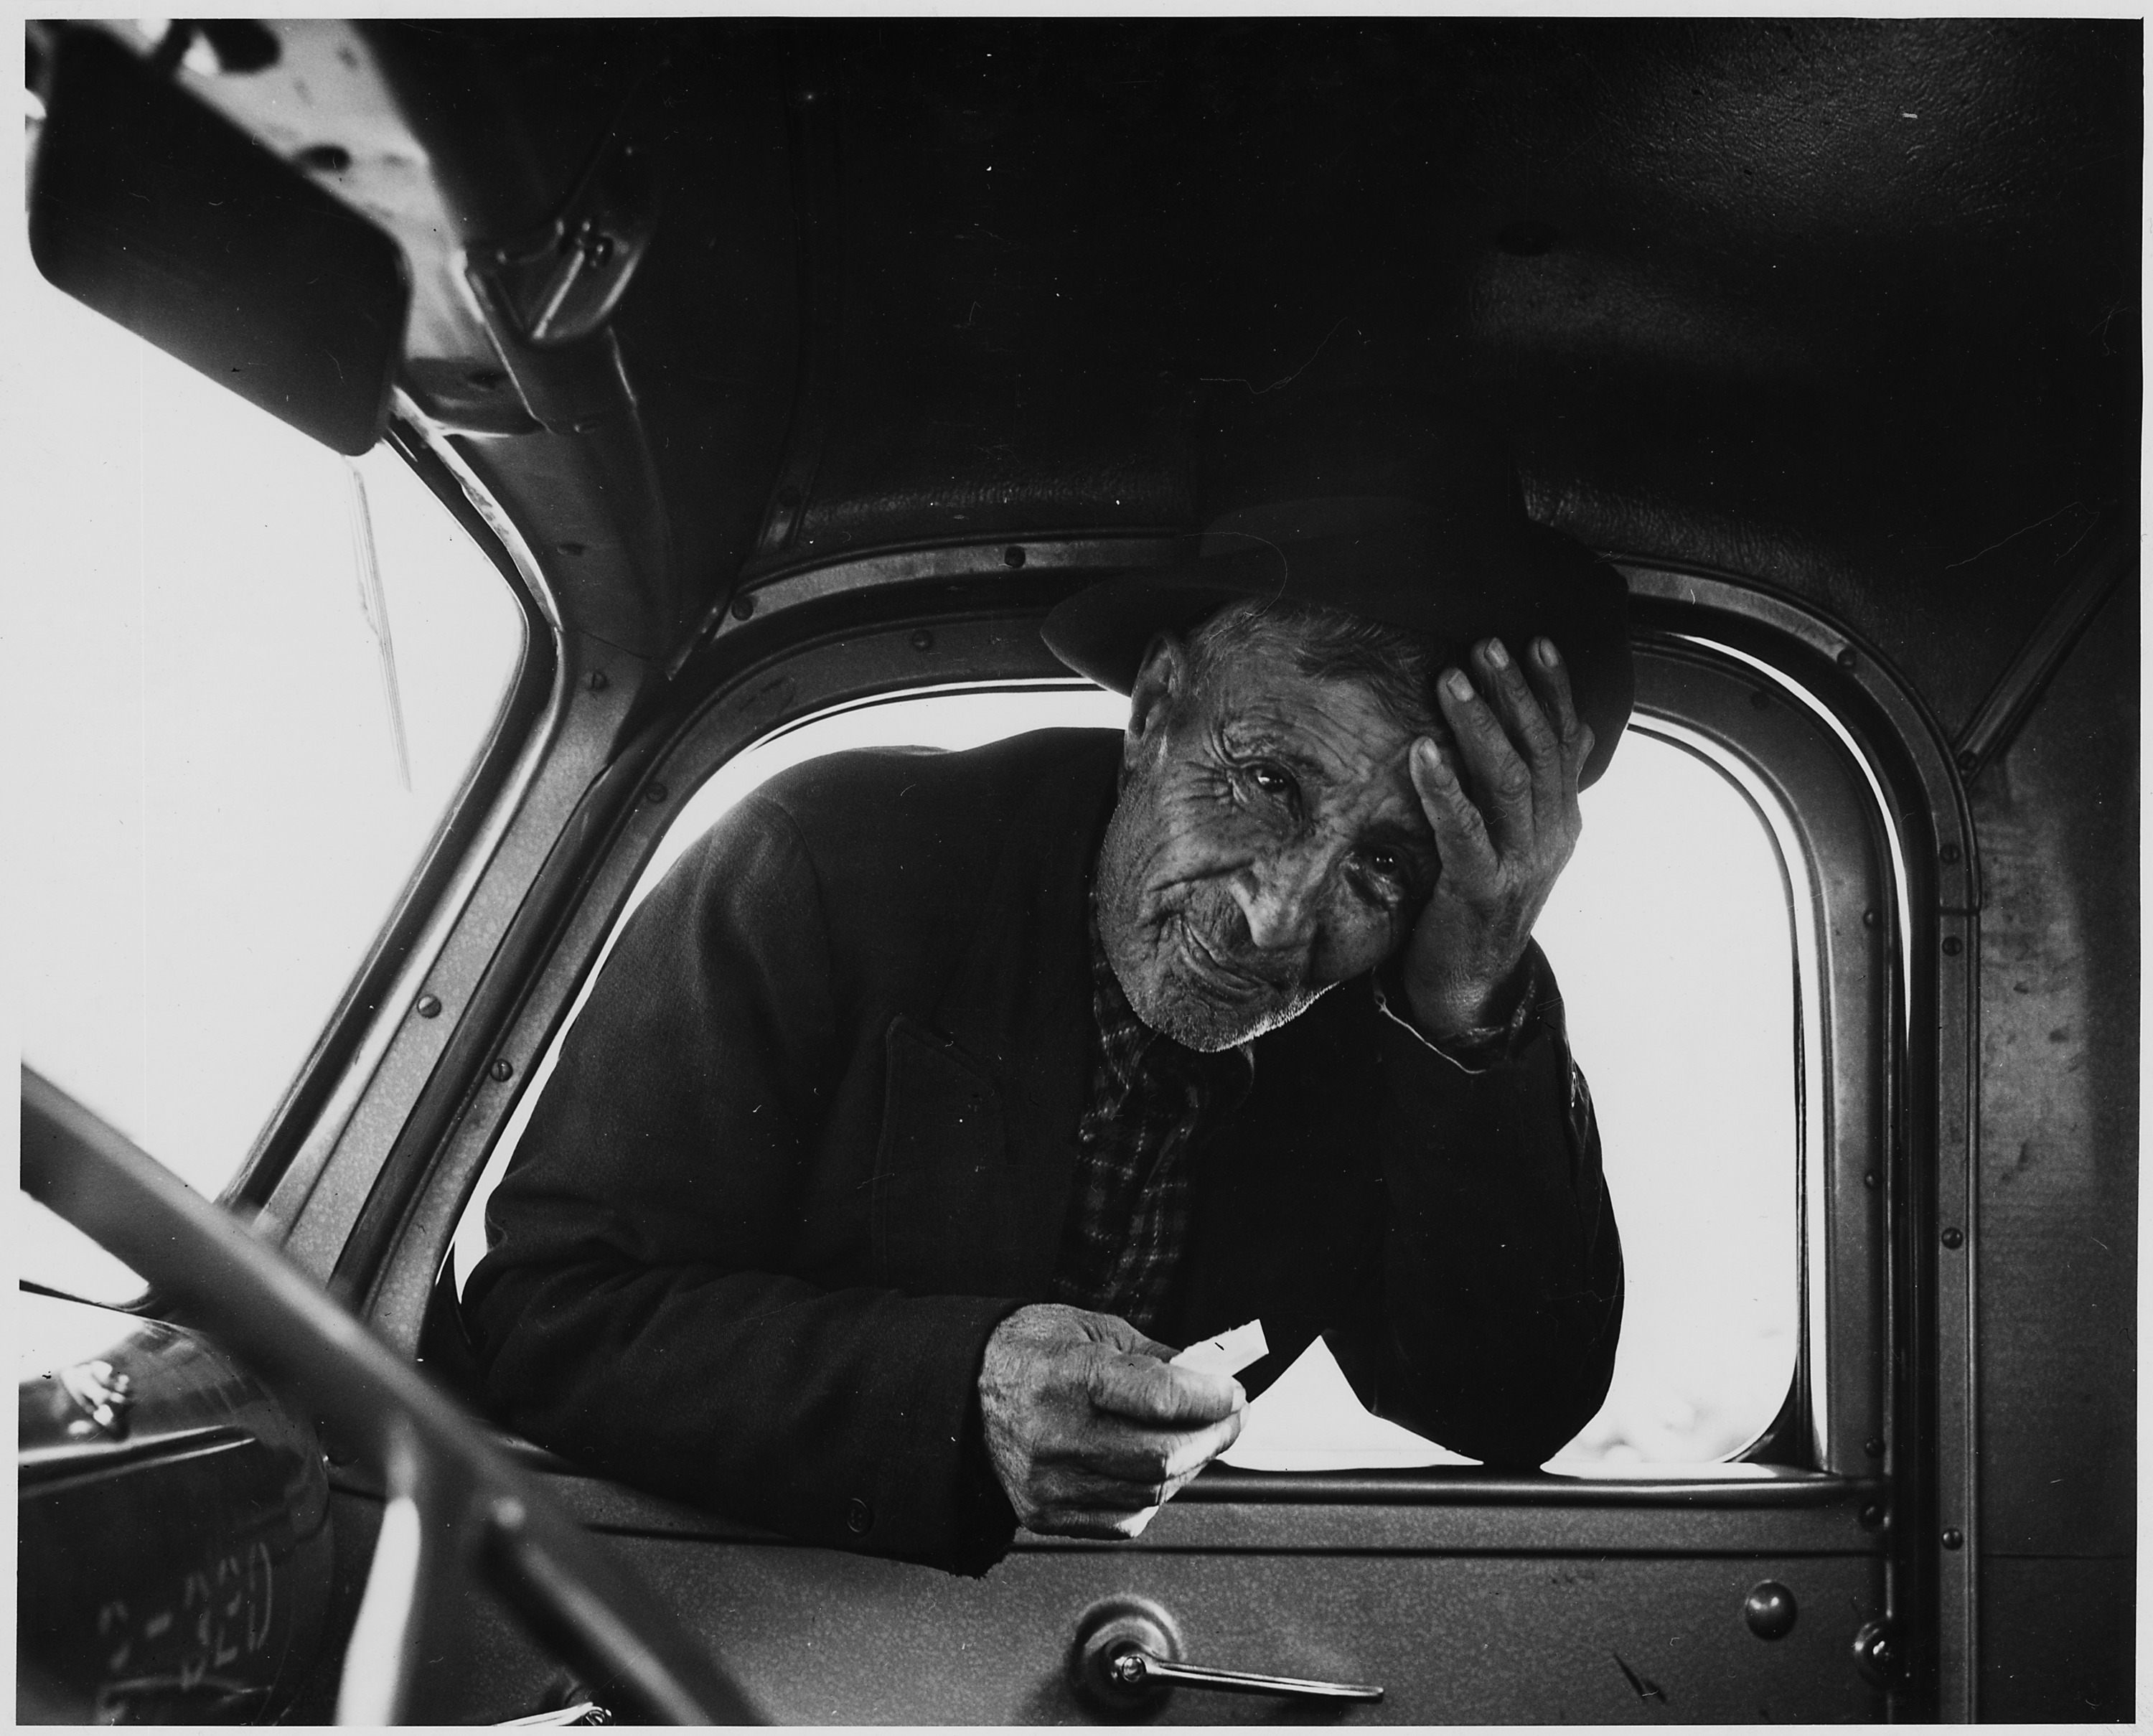 Taos County, New Mexico. Villager furnishes information through car window. - NARA - 521999